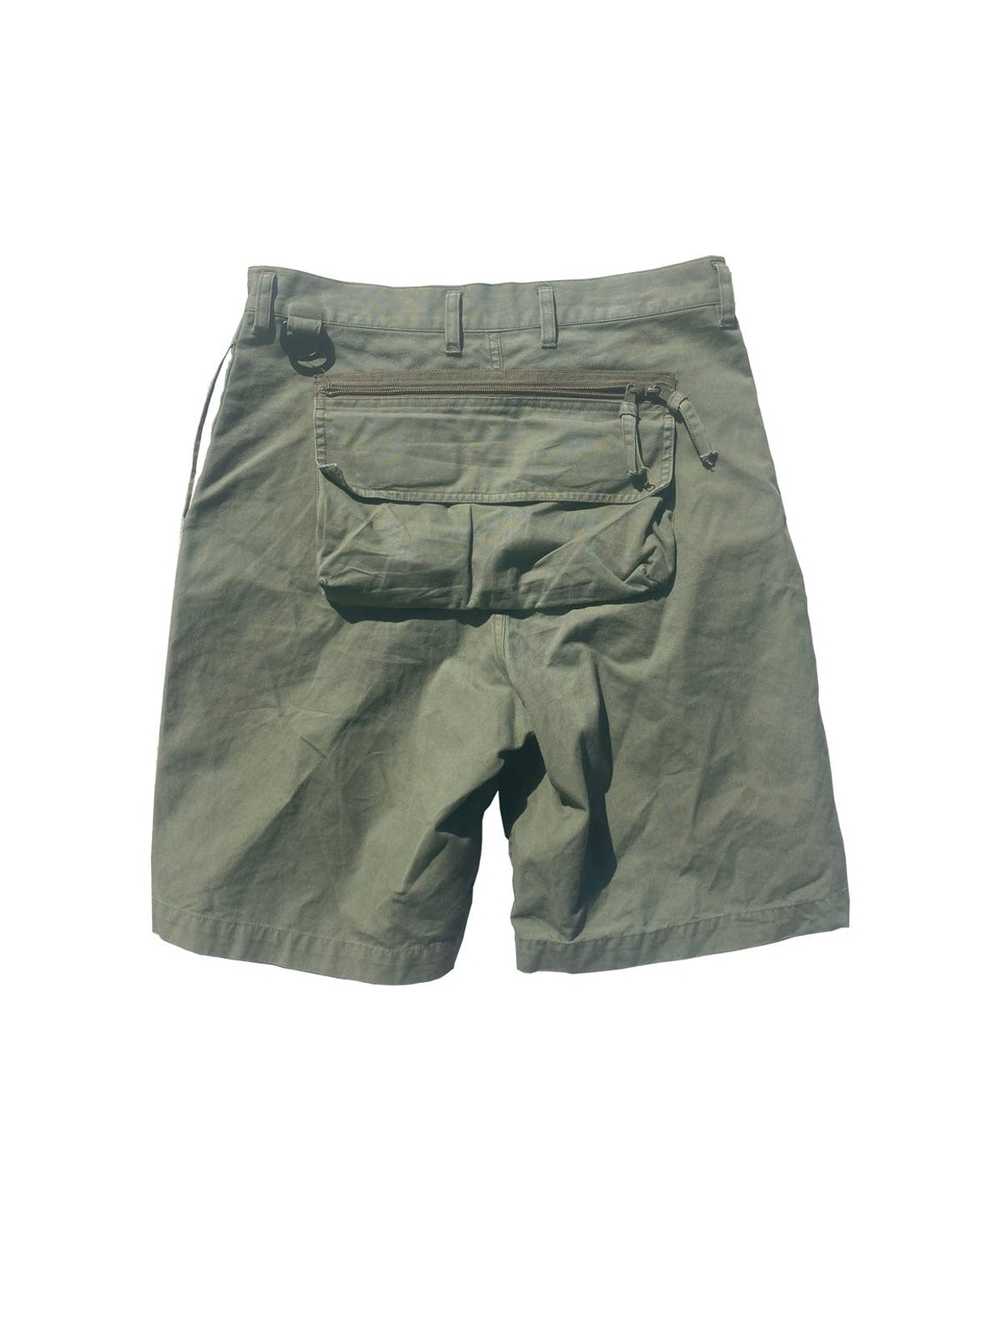 Vintage General/Mountain Research Shorts - image 2